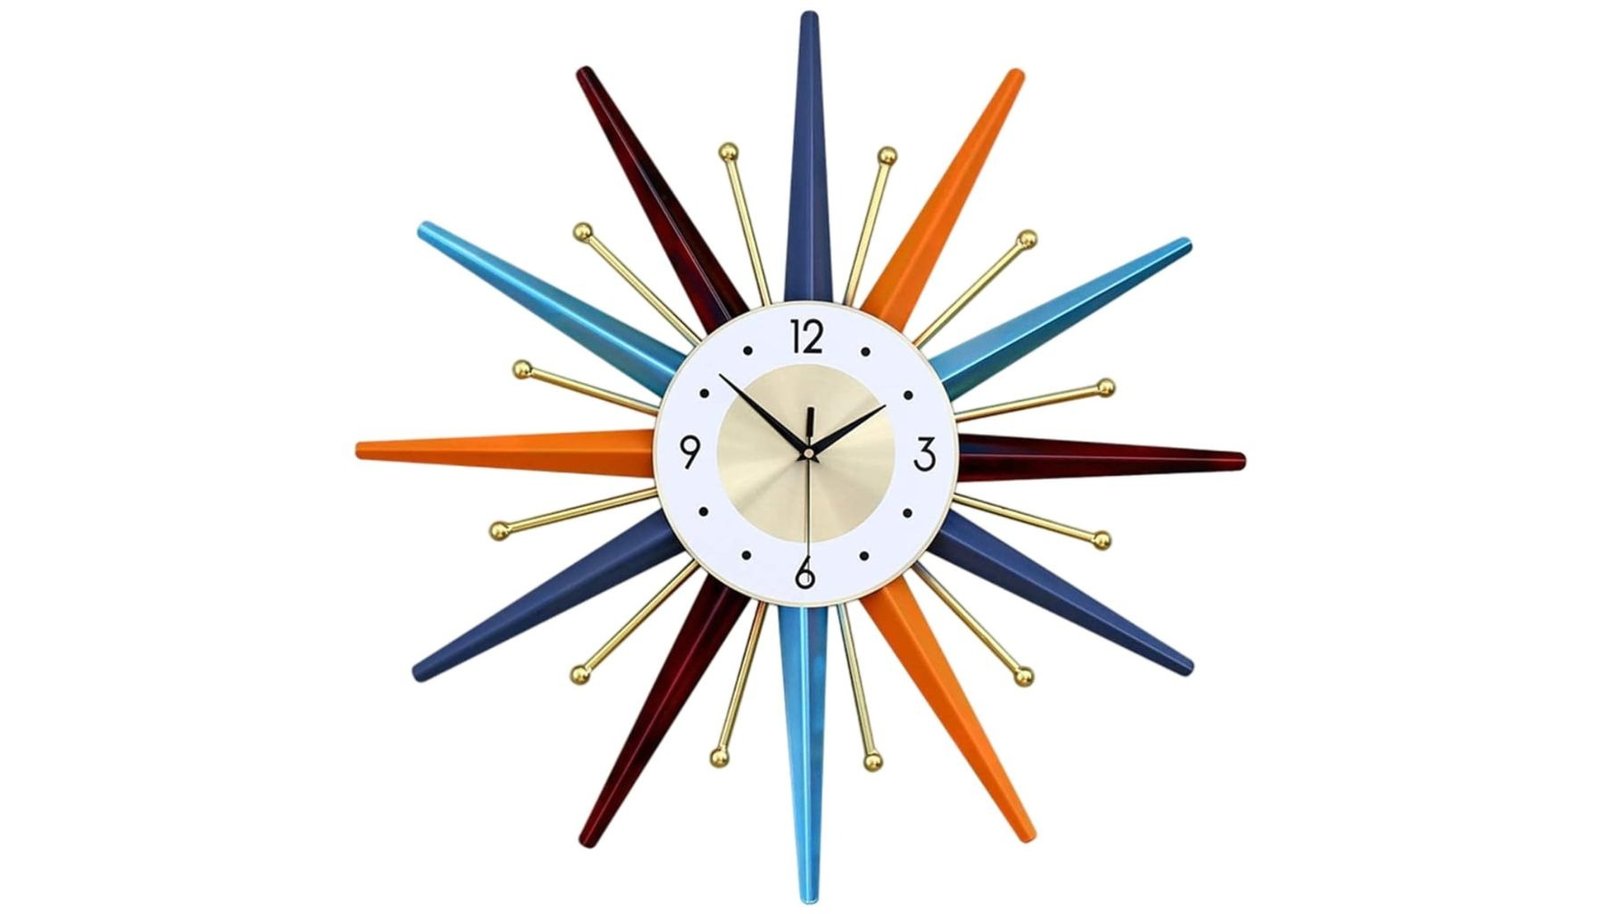 Vctrqov Large 22-Inch Starburst Mid-Century Modern Wall Clock Review